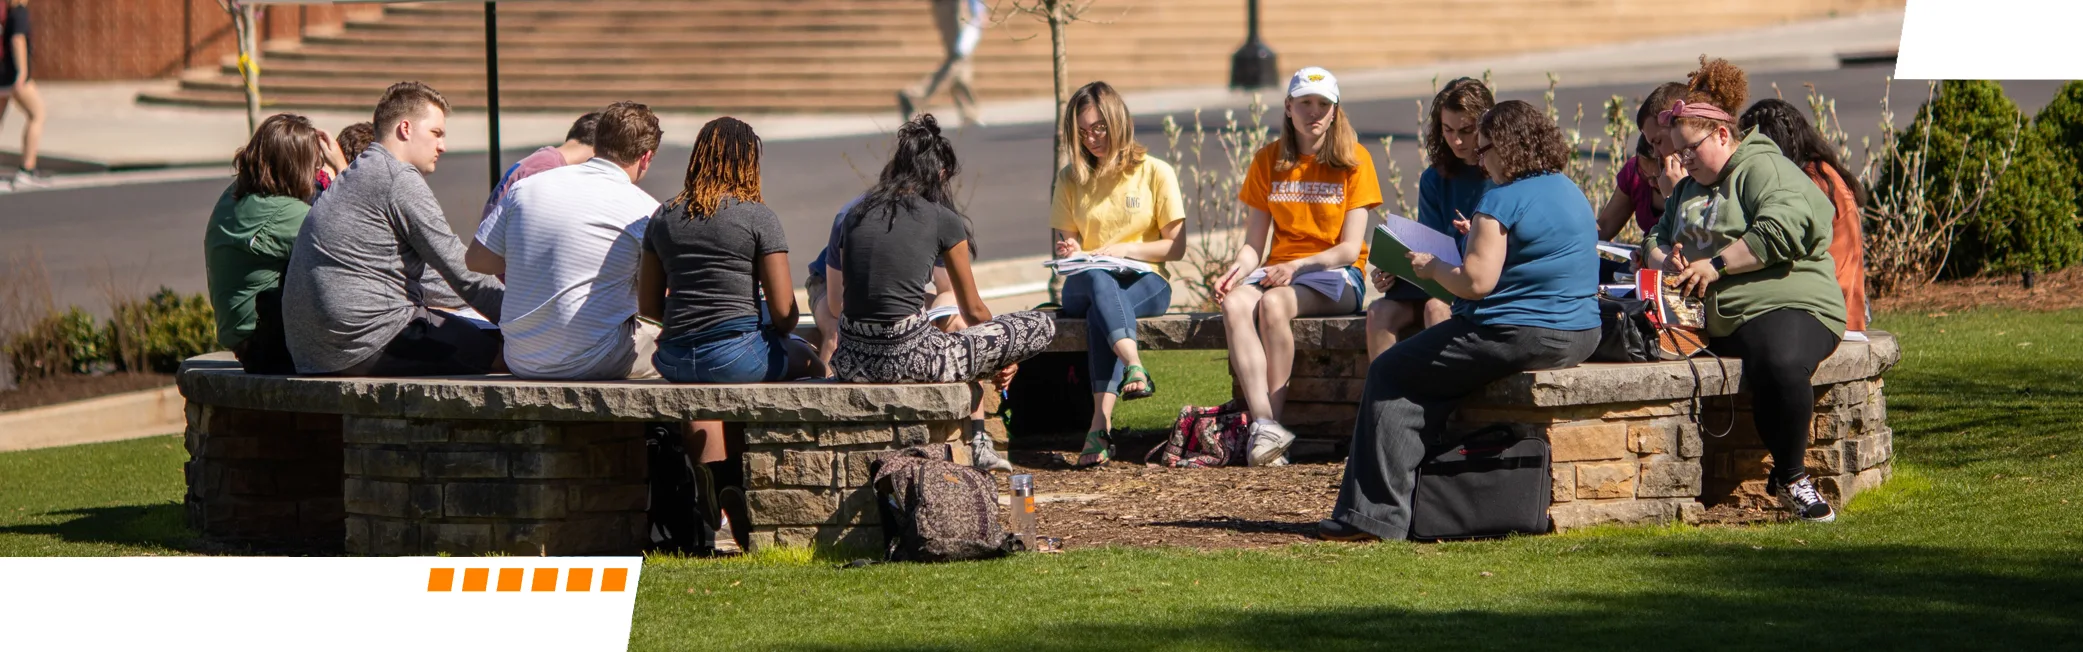 Photograph of a group of students having a discussion on a set of round benches in an outdoor setting. 